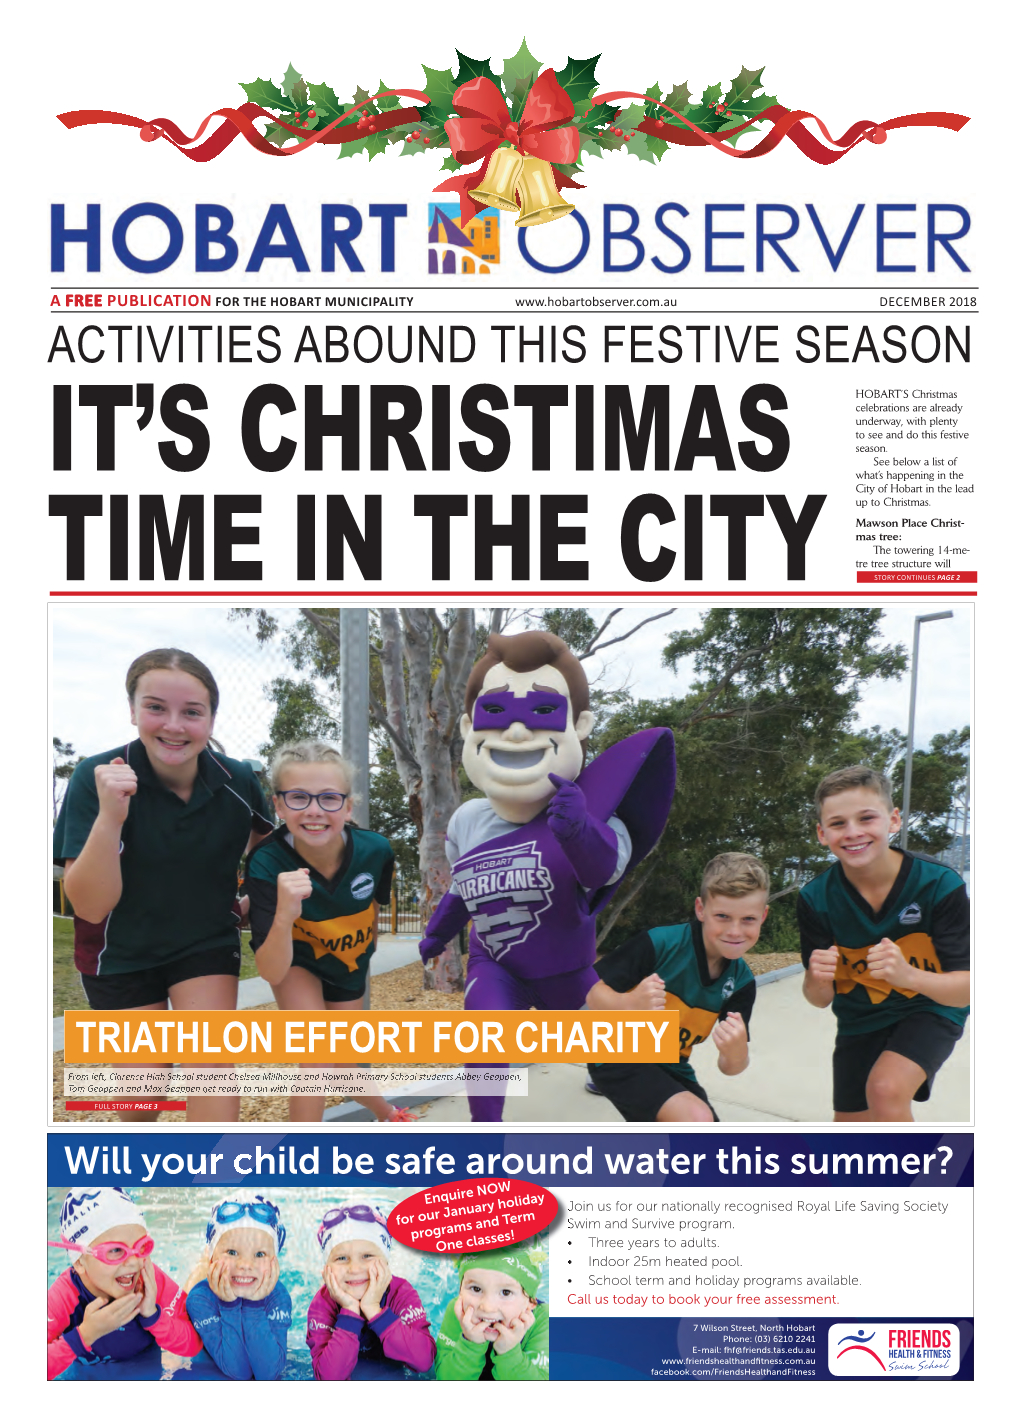 ACTIVITIES ABOUND THIS FESTIVE SEASON HOBART’S Christmas Celebrations Are Already Underway, with Plenty to See and Do This Festive Season